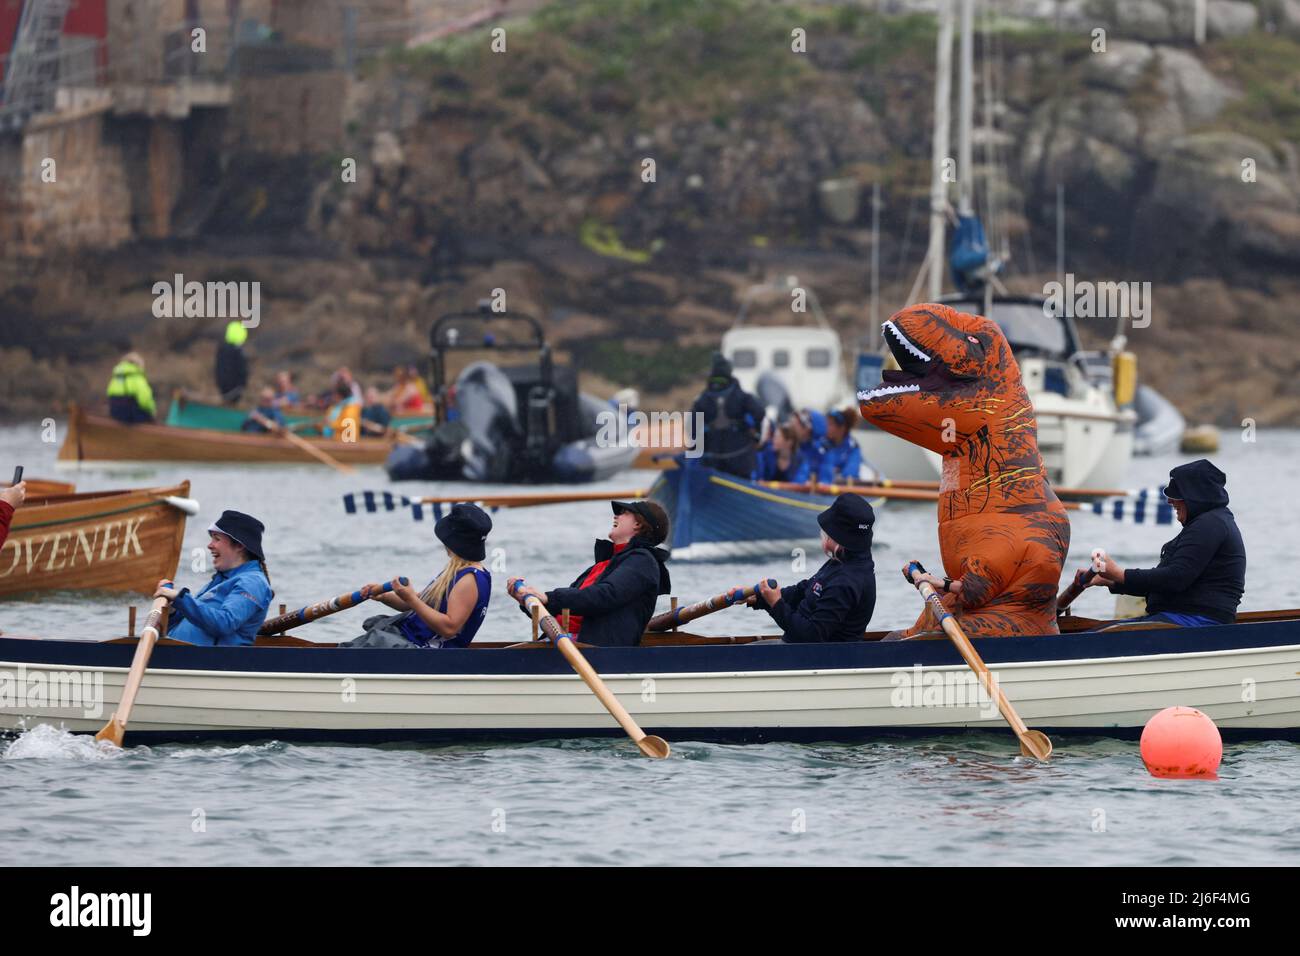 A rower wearing a dinosaur costume takes part in the World Pilot Gig rowing Championships, in the Isles of Scilly, Britain, May 1, 2022. REUTERS/Tom Nicholson Stock Photo